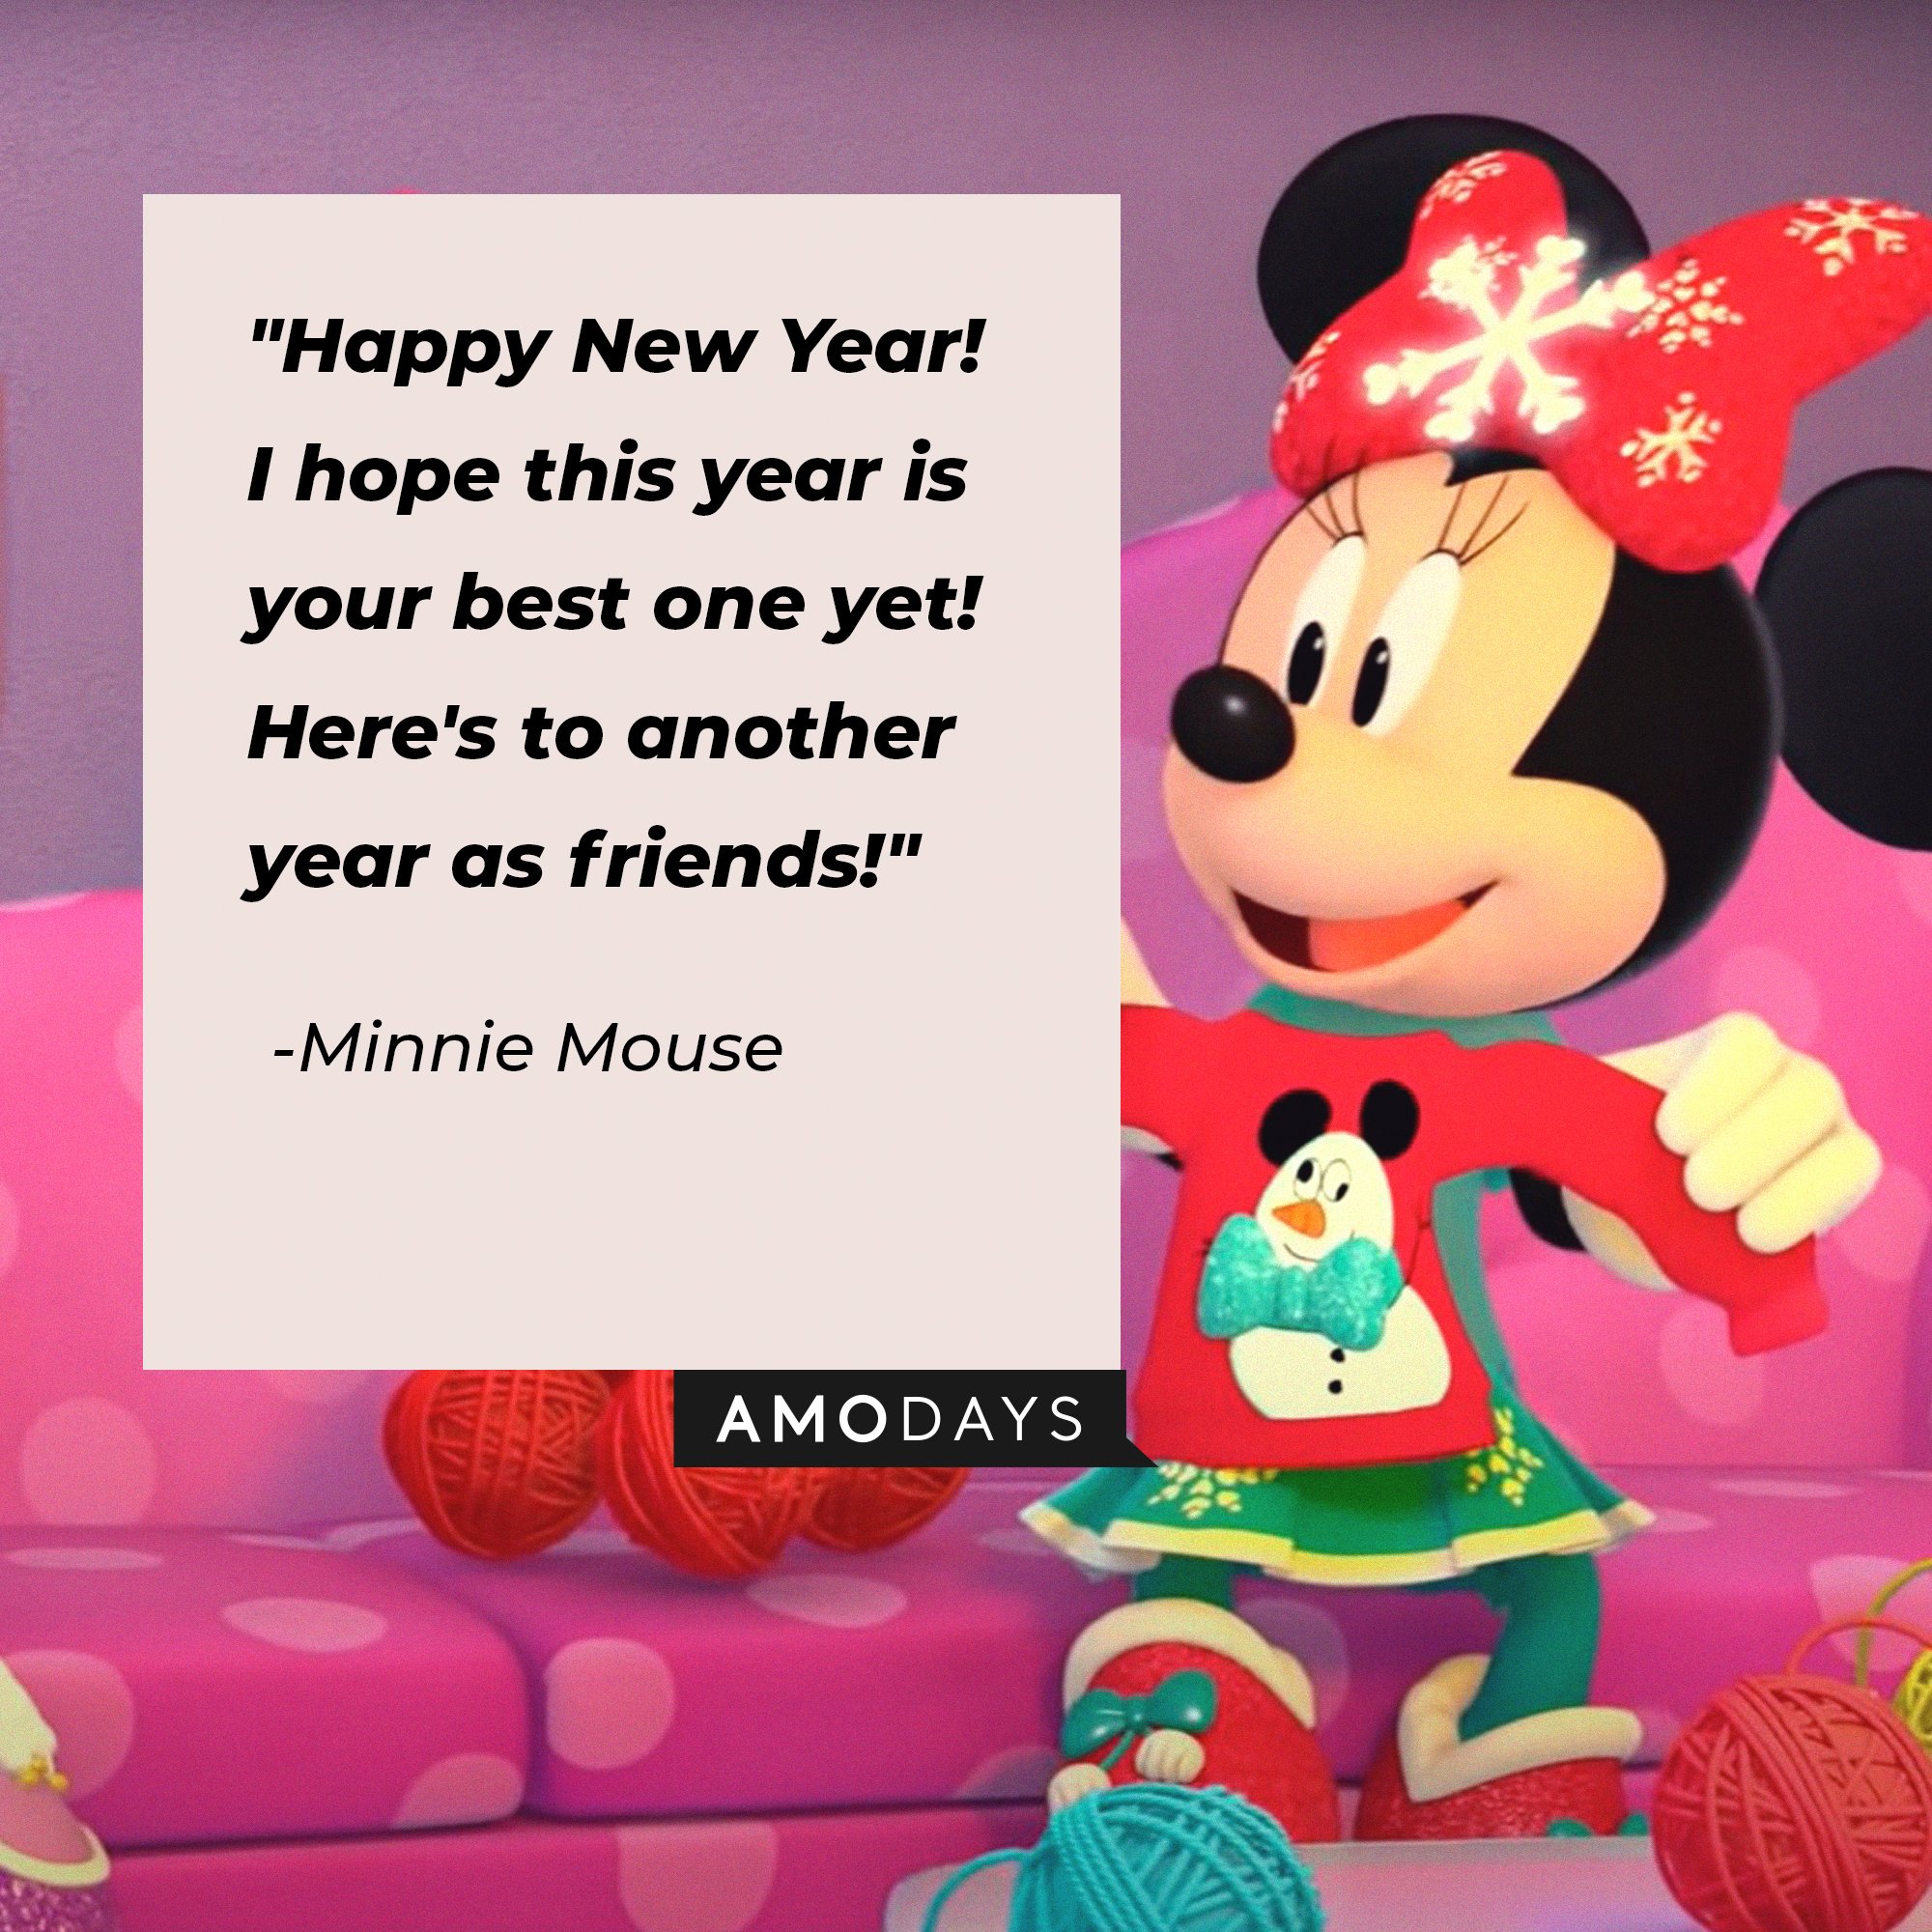 Minnie Mouse’s quote: "Happy New Year! I hope this year is your best one yet! Here's to another year as friends." | Image: AmoDays